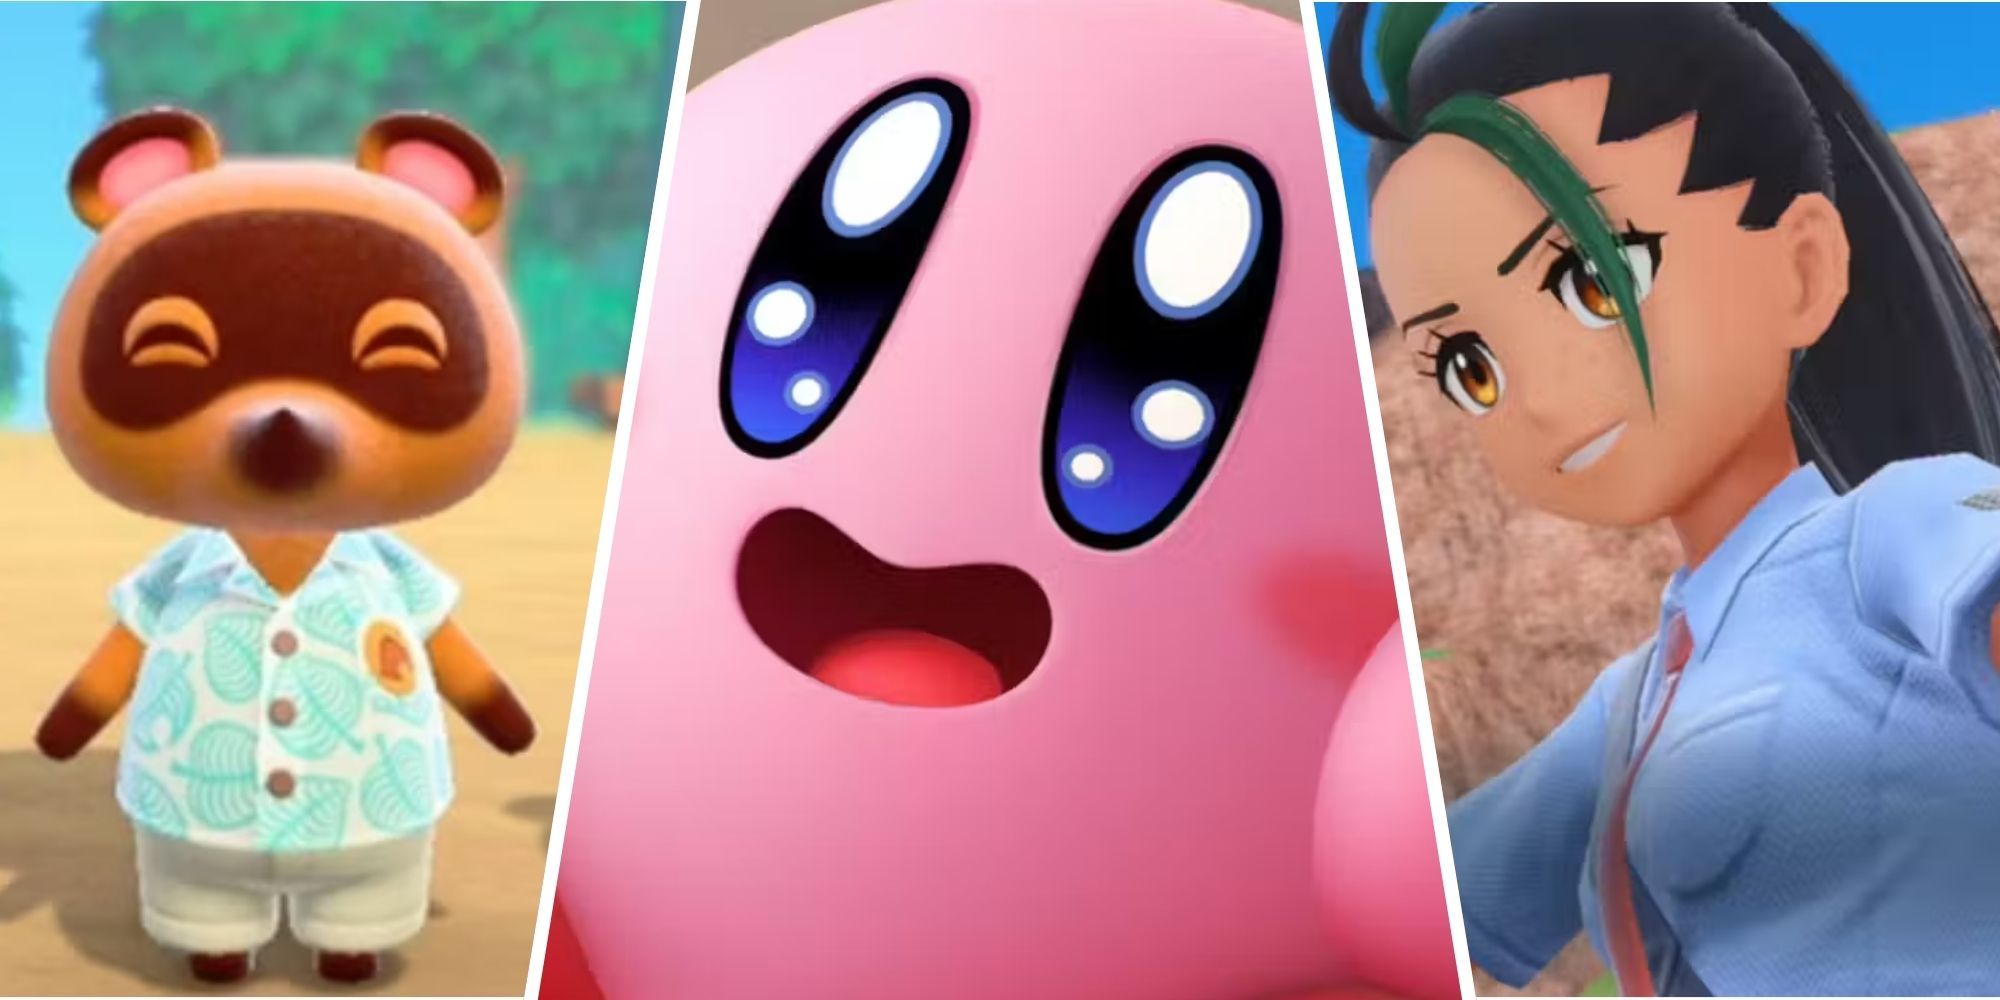 Tom Nook, Kirby and Nimona as the nicest characters in gaming